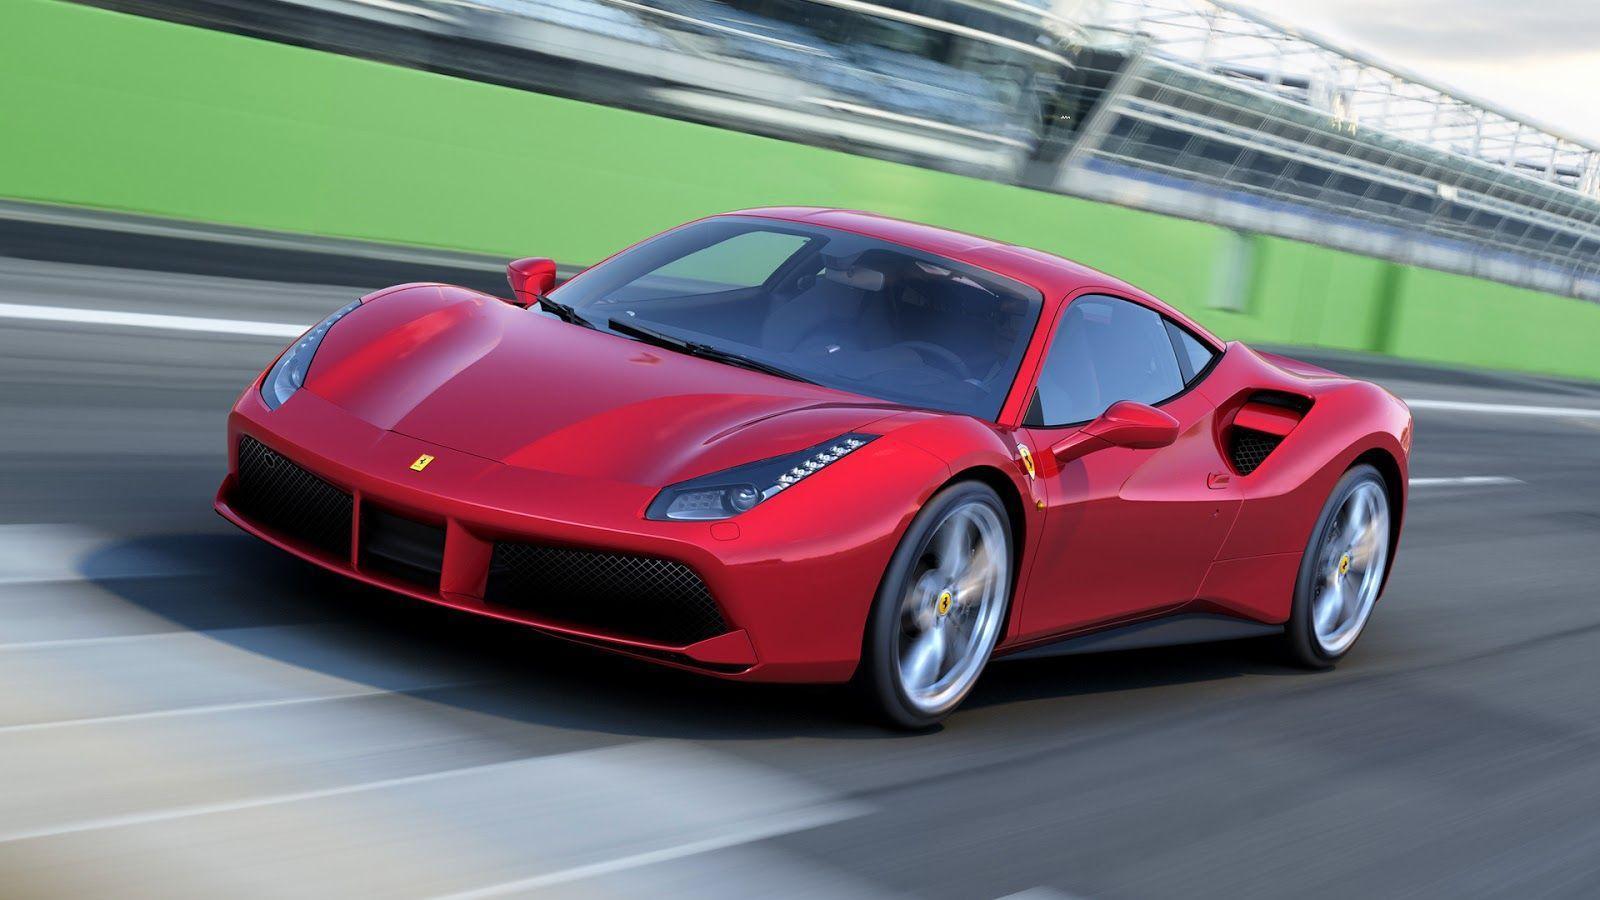 Ferrari 488 GTB Image Picture And Photo Gallery In One